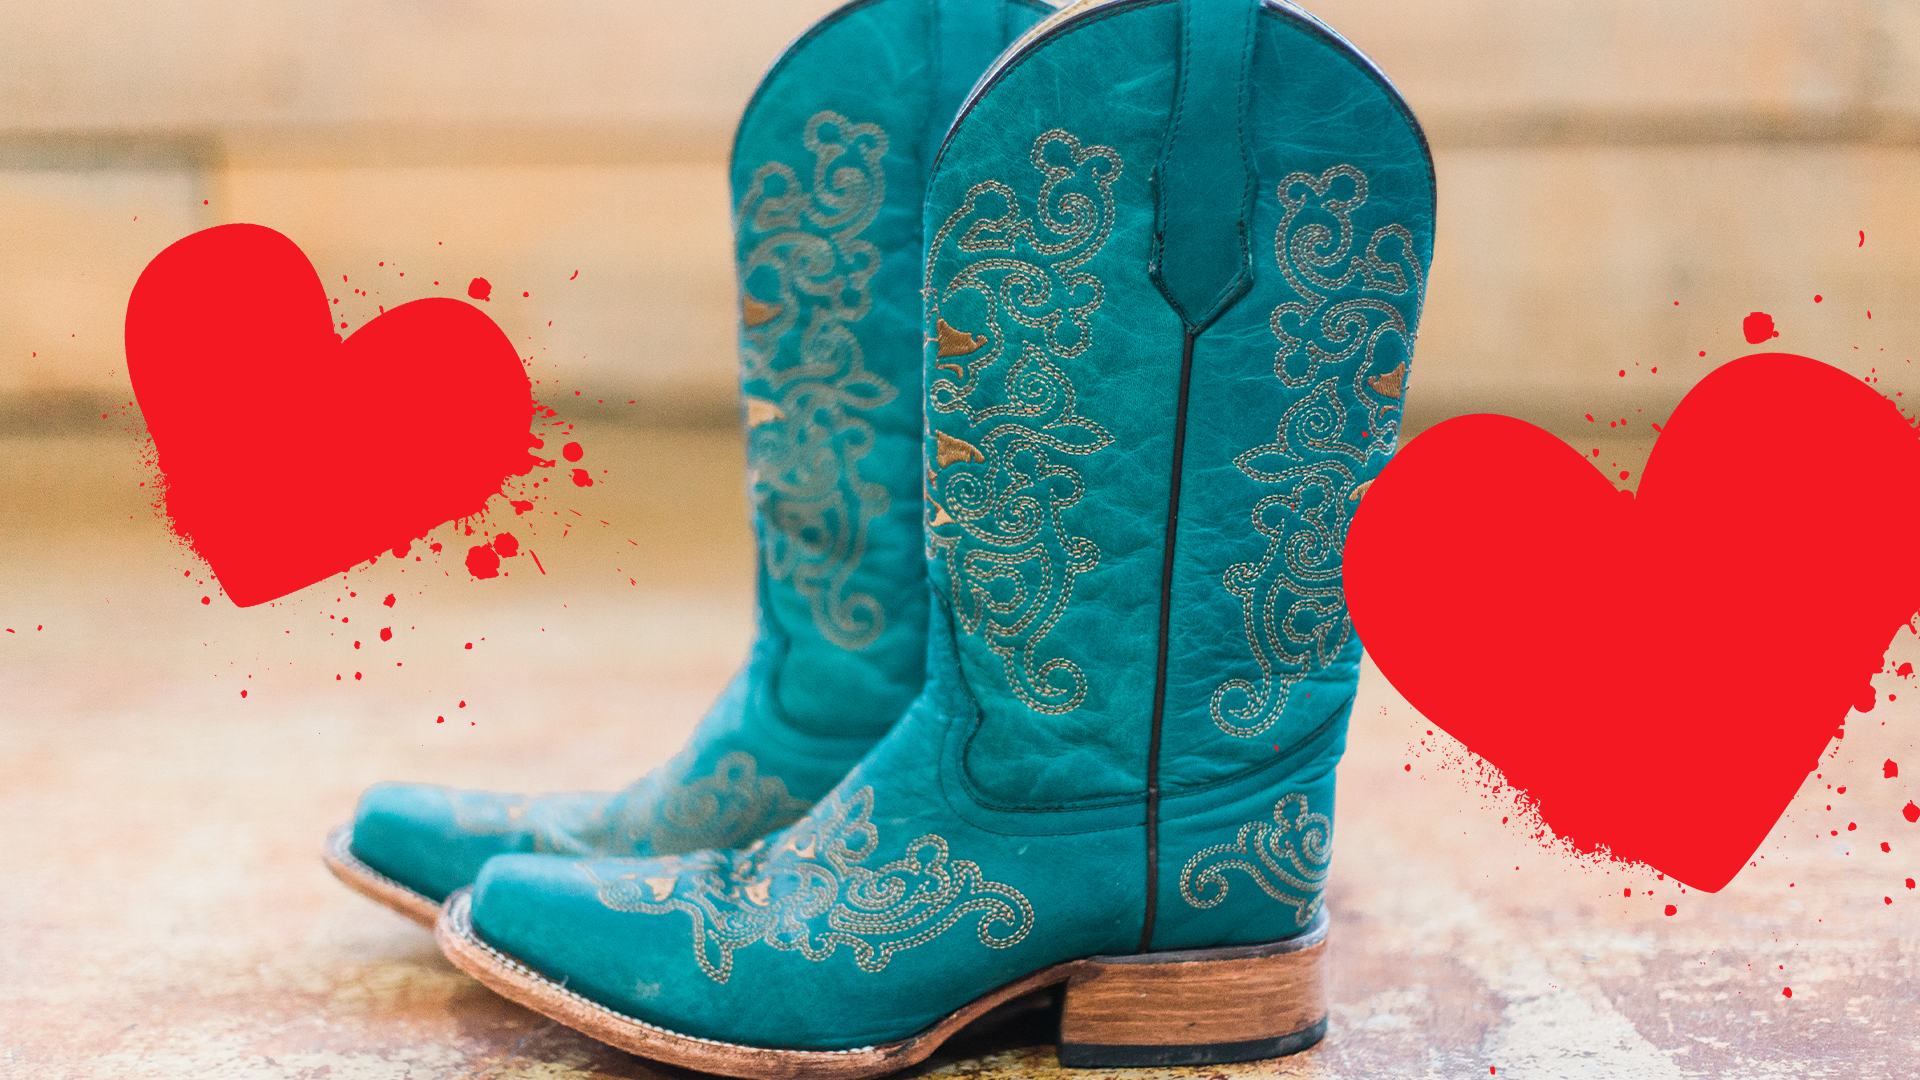 Cowboy boots and love hearts